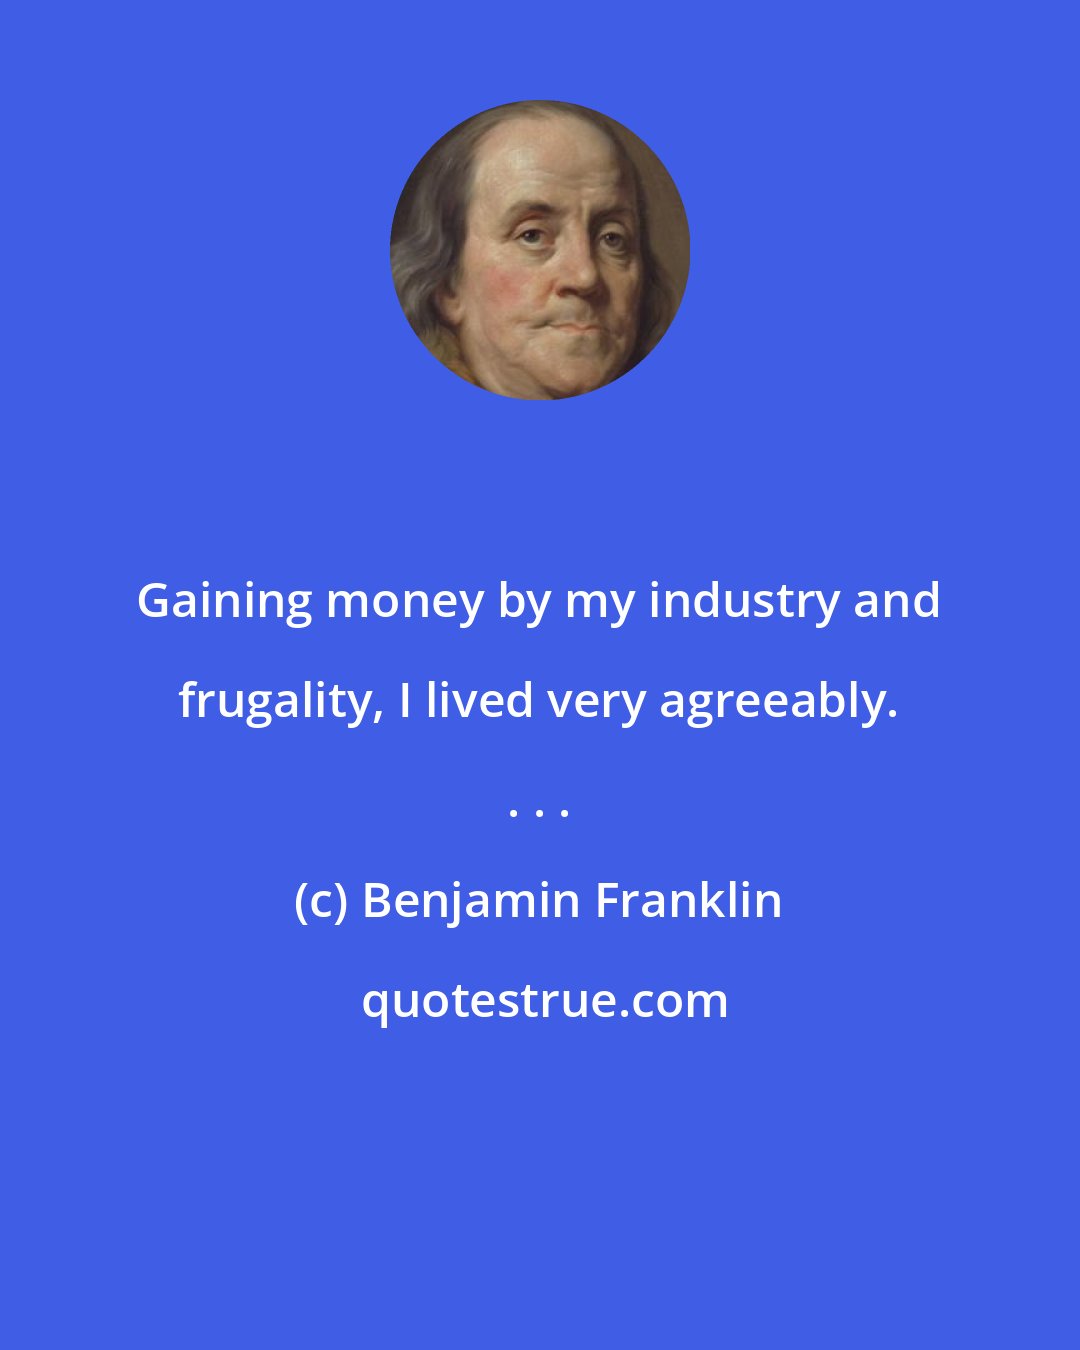 Benjamin Franklin: Gaining money by my industry and frugality, I lived very agreeably. . . .